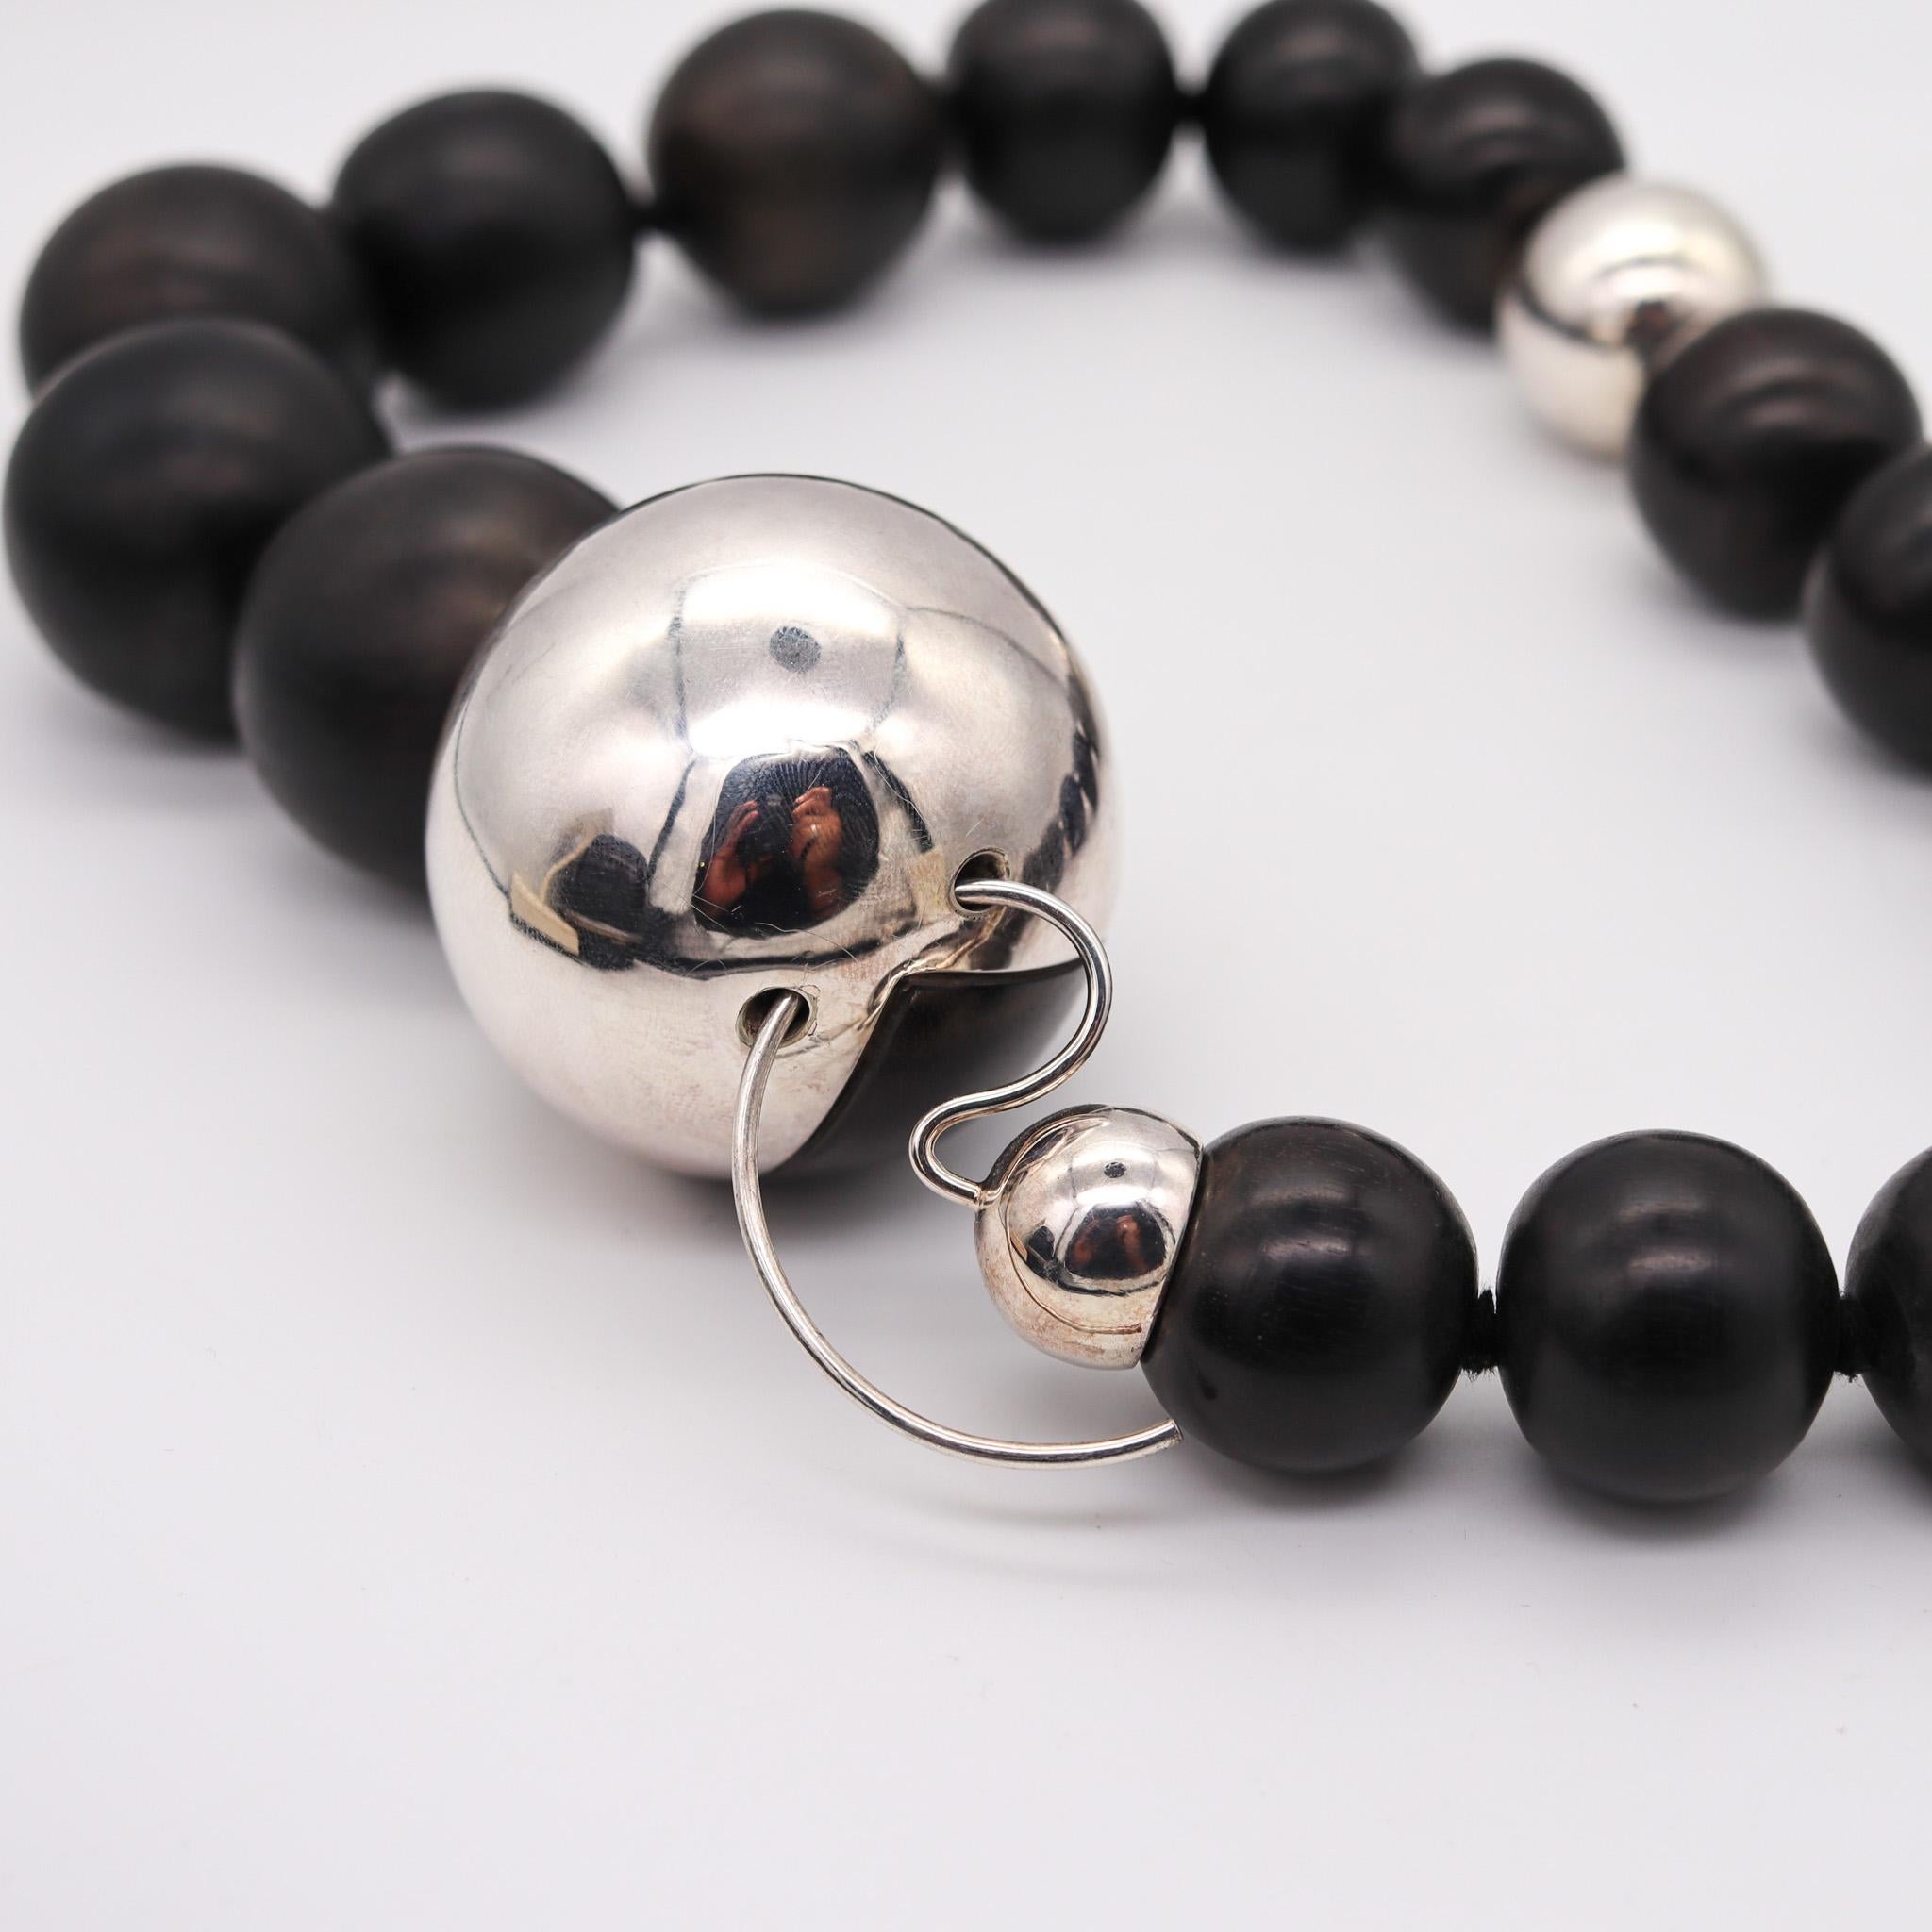 Ebony wood necklace designed by Monica Coscioni. 

Gorgeous modernist necklace, created in the city of Orvieto Italy at the jewelry atelier of the designer Monica Coscioni. This beautiful necklace has been crafted in solid .925/.999 sterling silver,